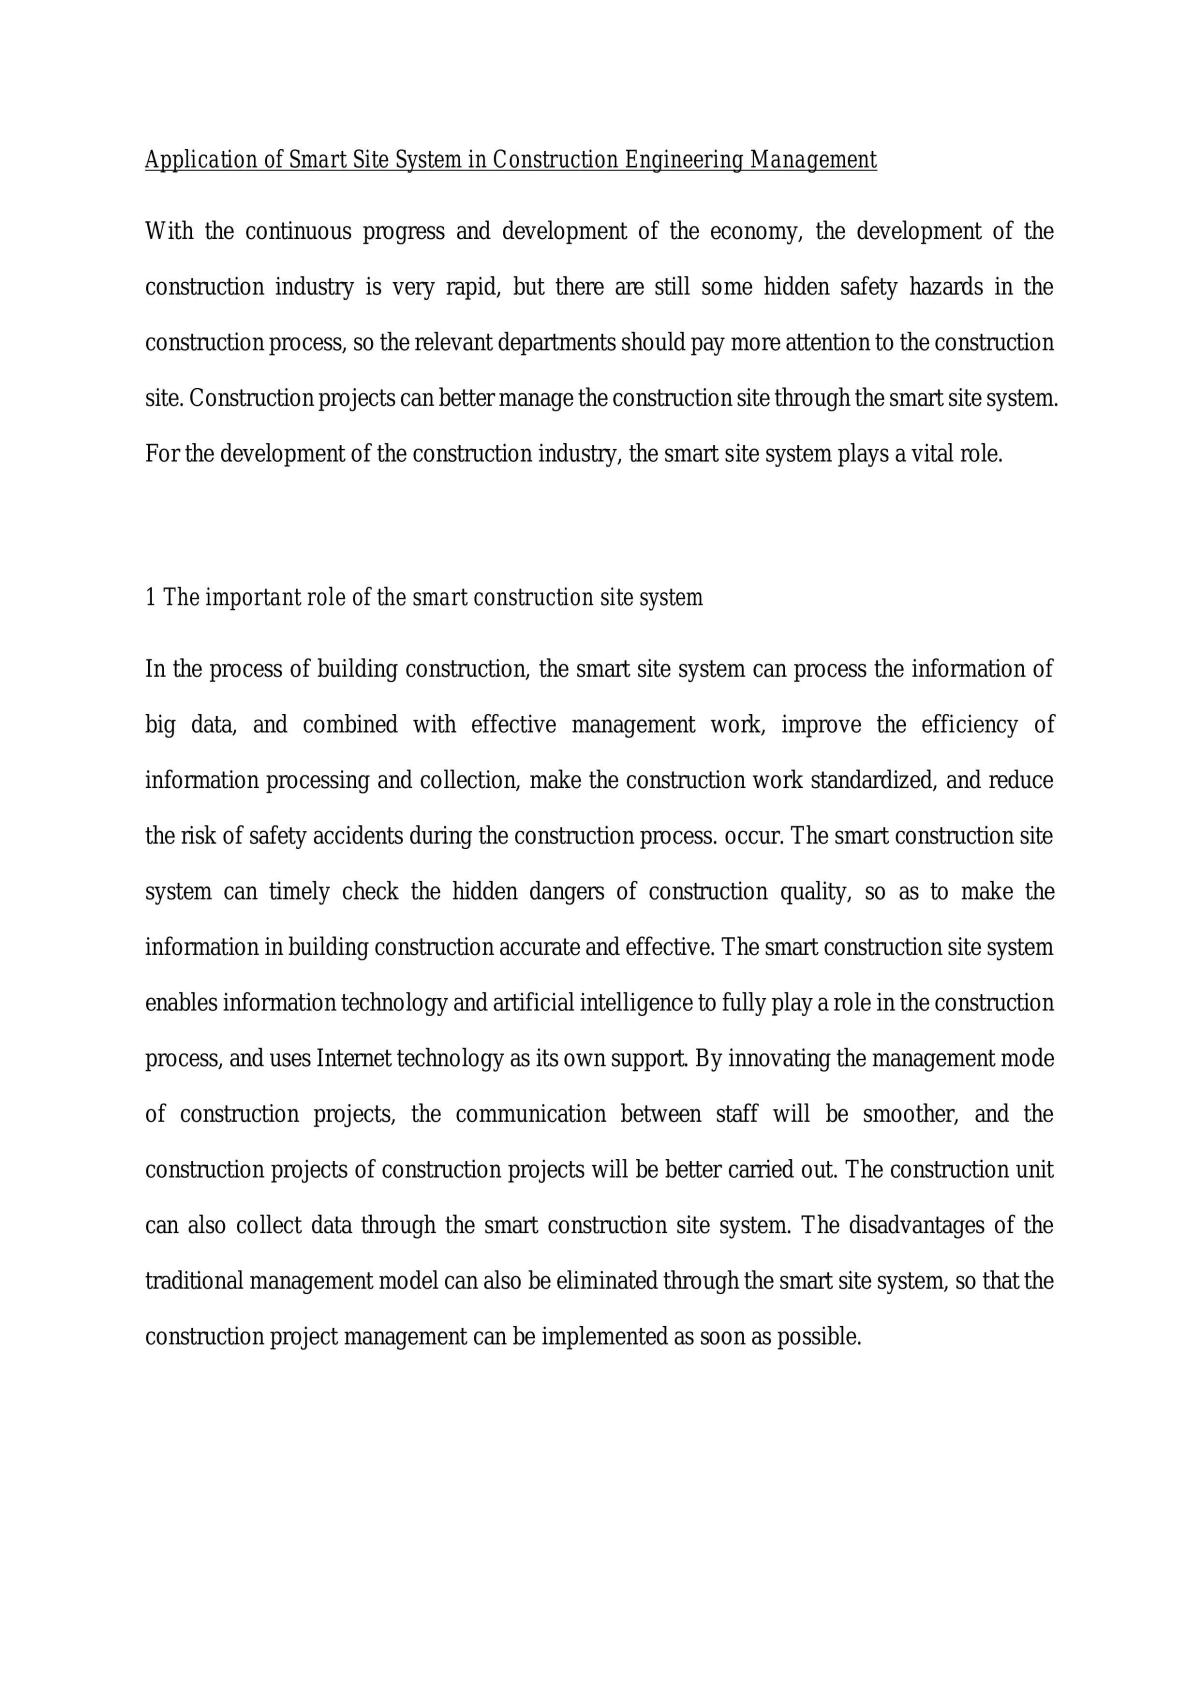 Application of Smart Site System in Construction Engineering Management - Page 1